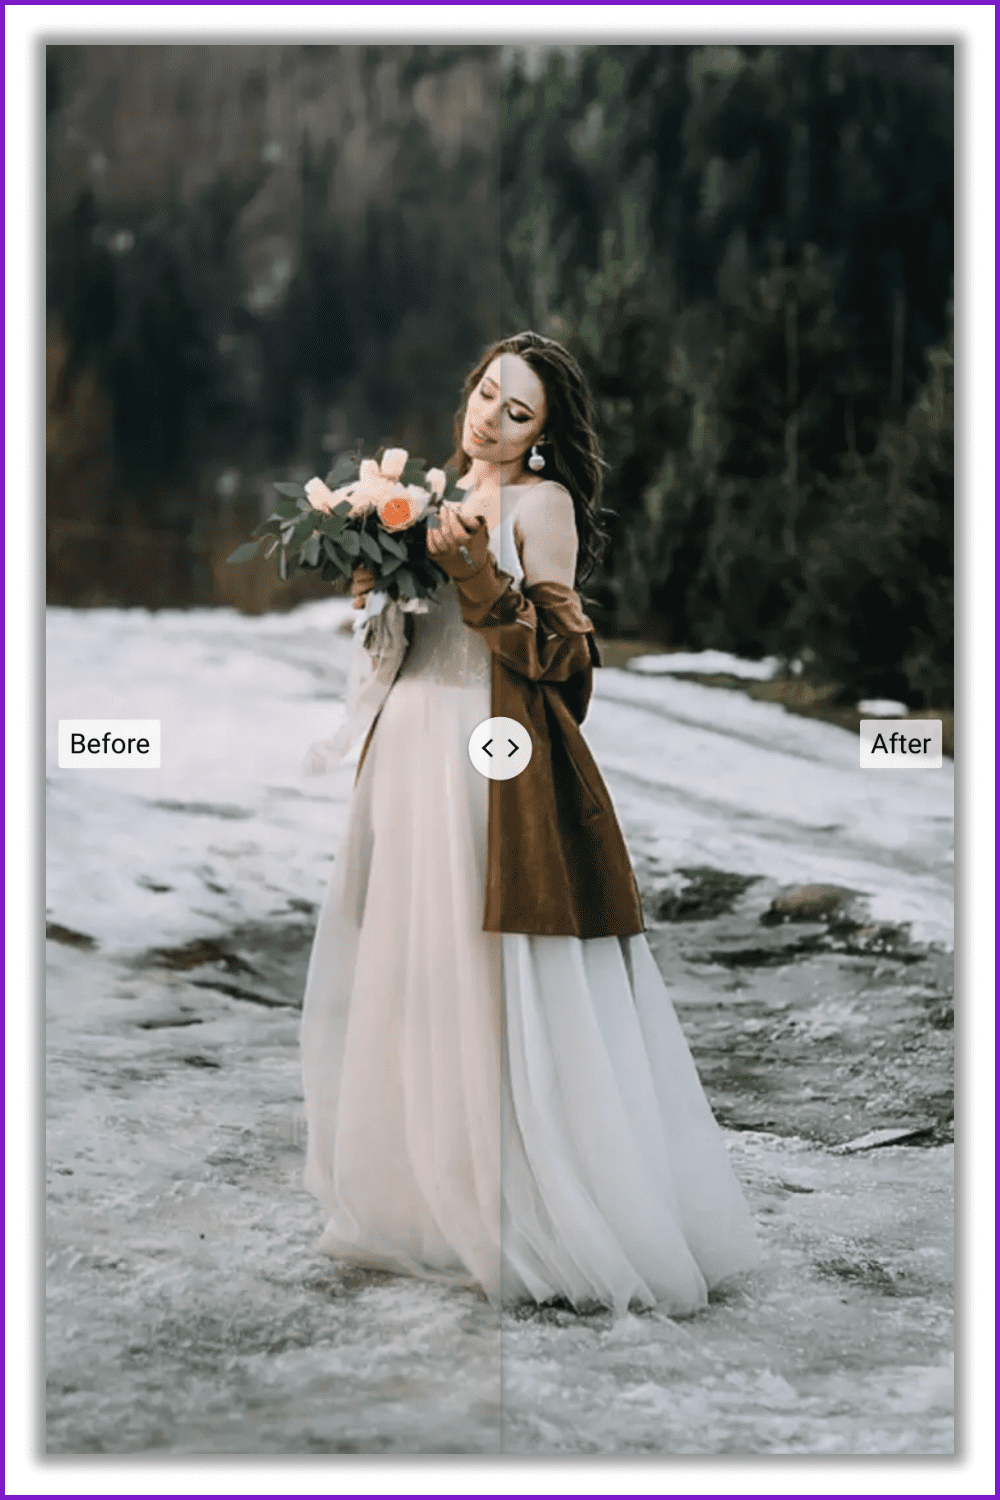 Photo of a girl in a white dress on a background of forest and snow.